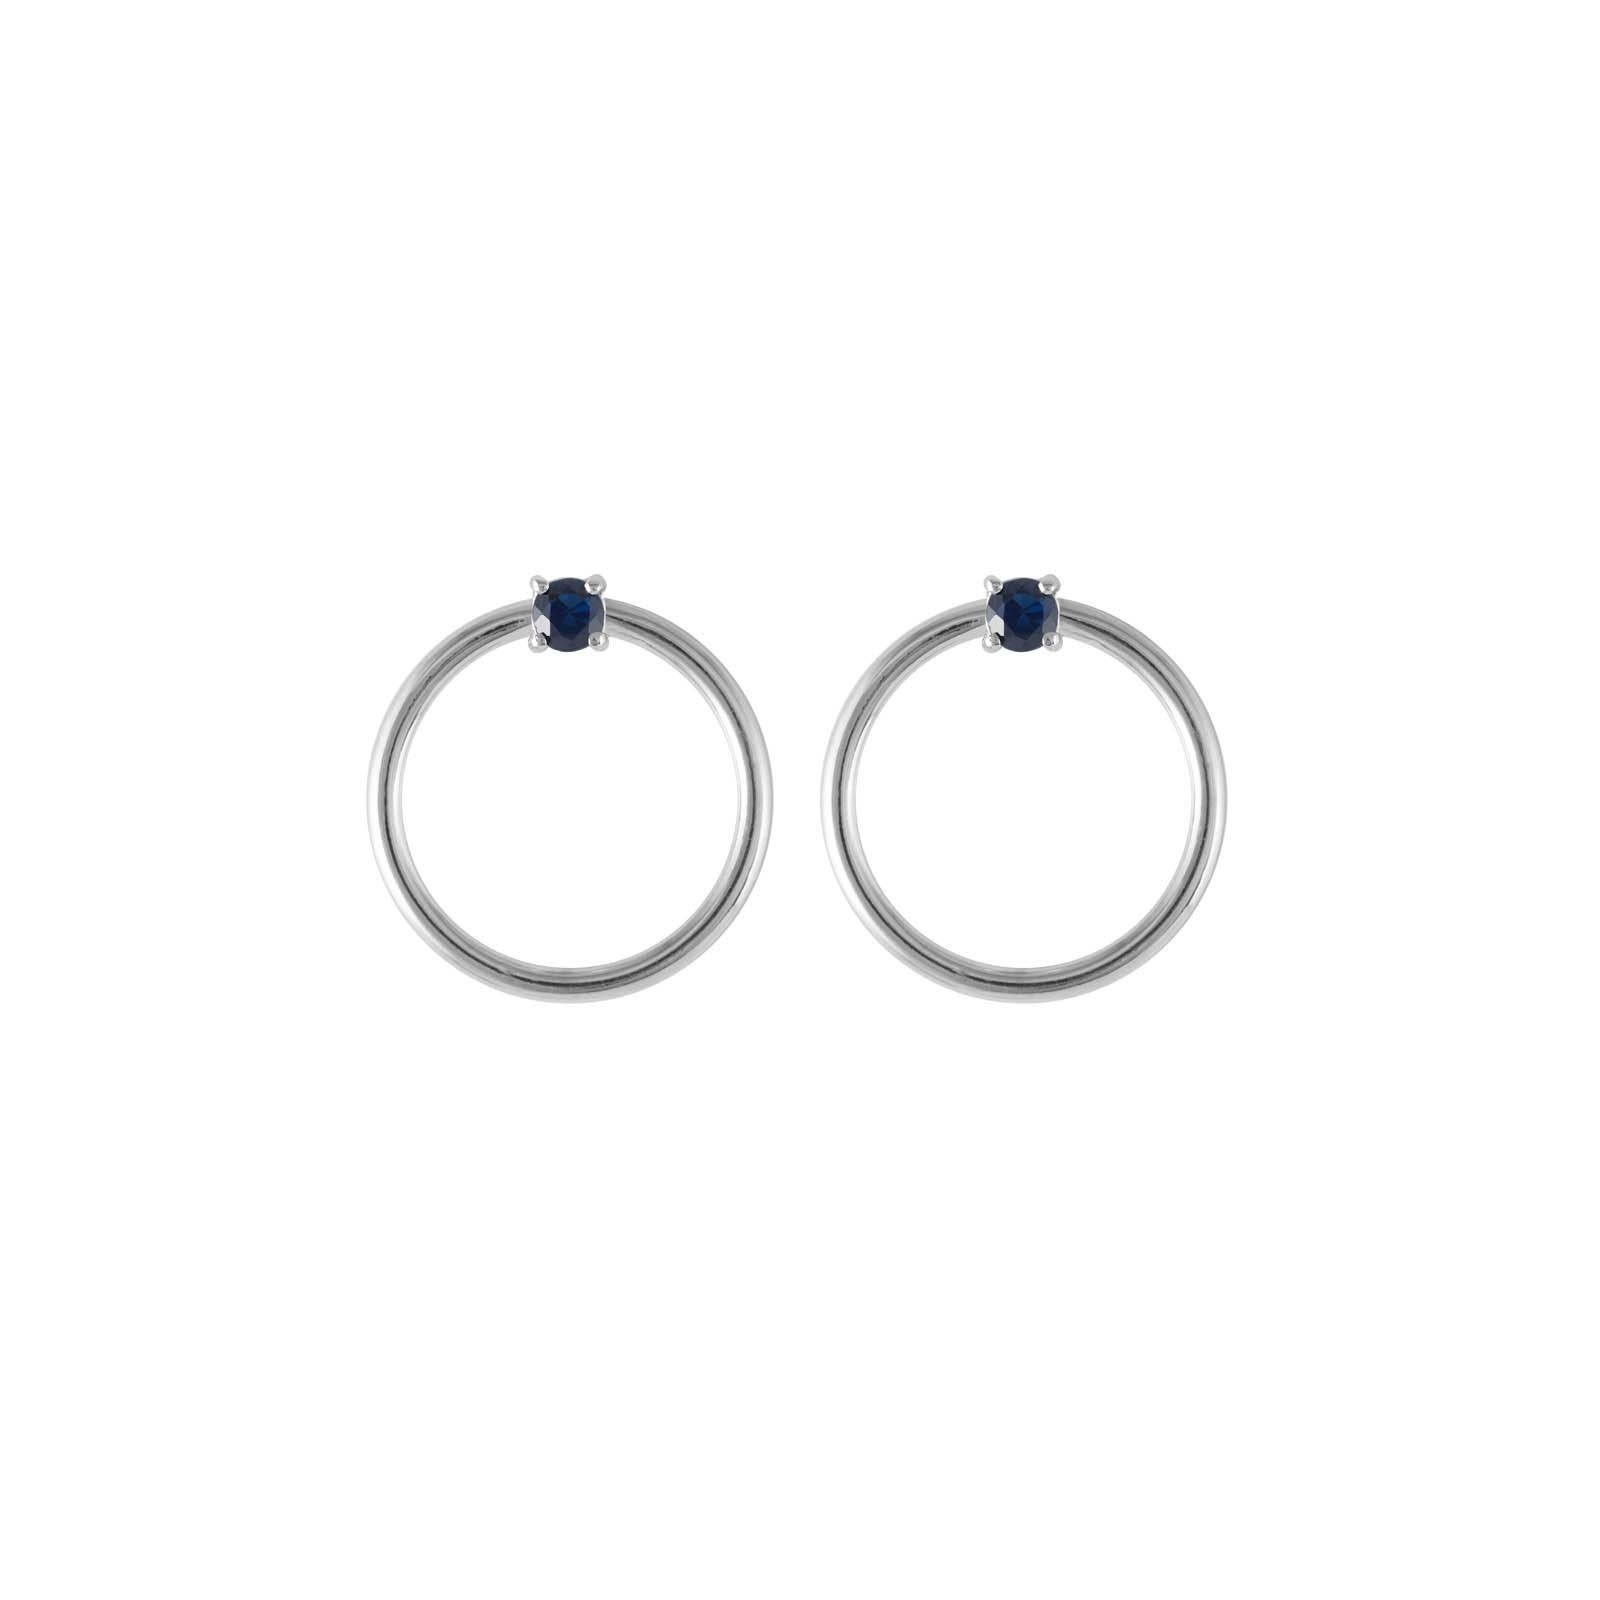 Sapphire and white gold small front facing hoop earrings and the Large Orbit Hoop Multiplier earring jackets are here sold as a set and offered at a discount. Elegant chic earrings set with round brilliant cut blue sapphires in 18 karat white gold.